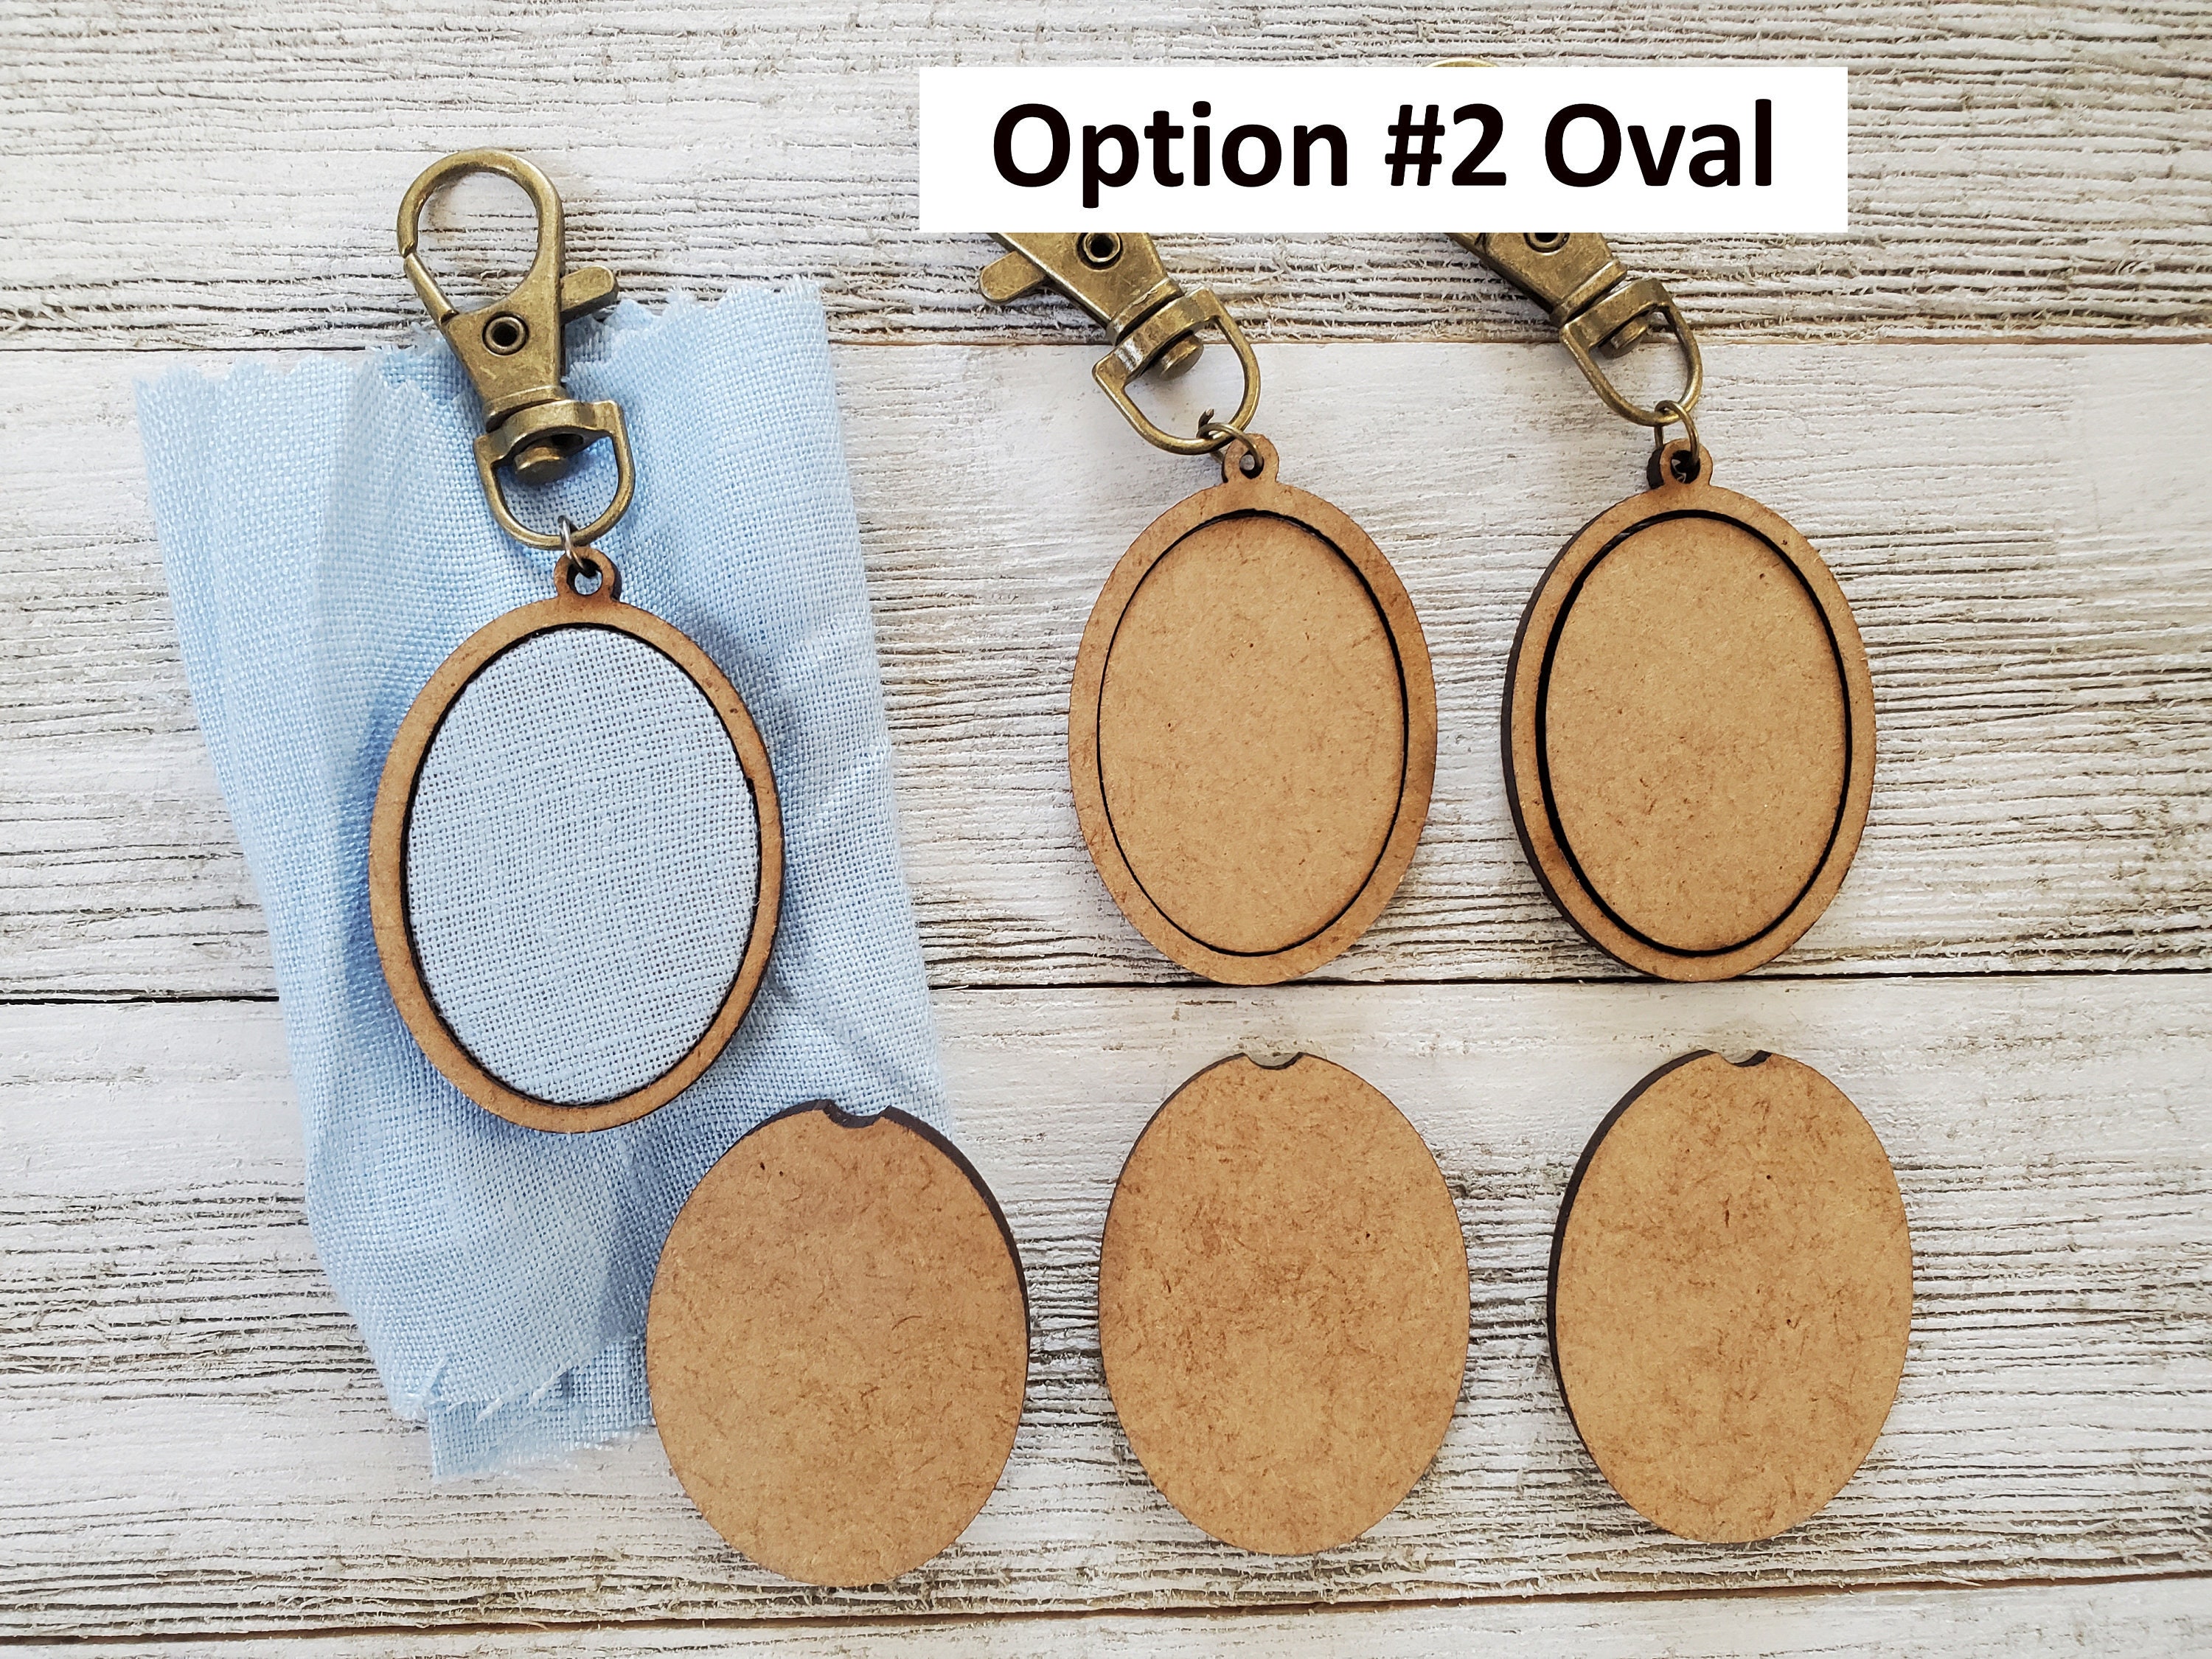  Piutouyar Mini Embroidery Hoop Wooden, Small Cross Stitch Hoop,  Heart Embroidery Hoop for Keychain, DIY Pendant , Jewelry(1.6×1.6 Inch,  10Pcs)